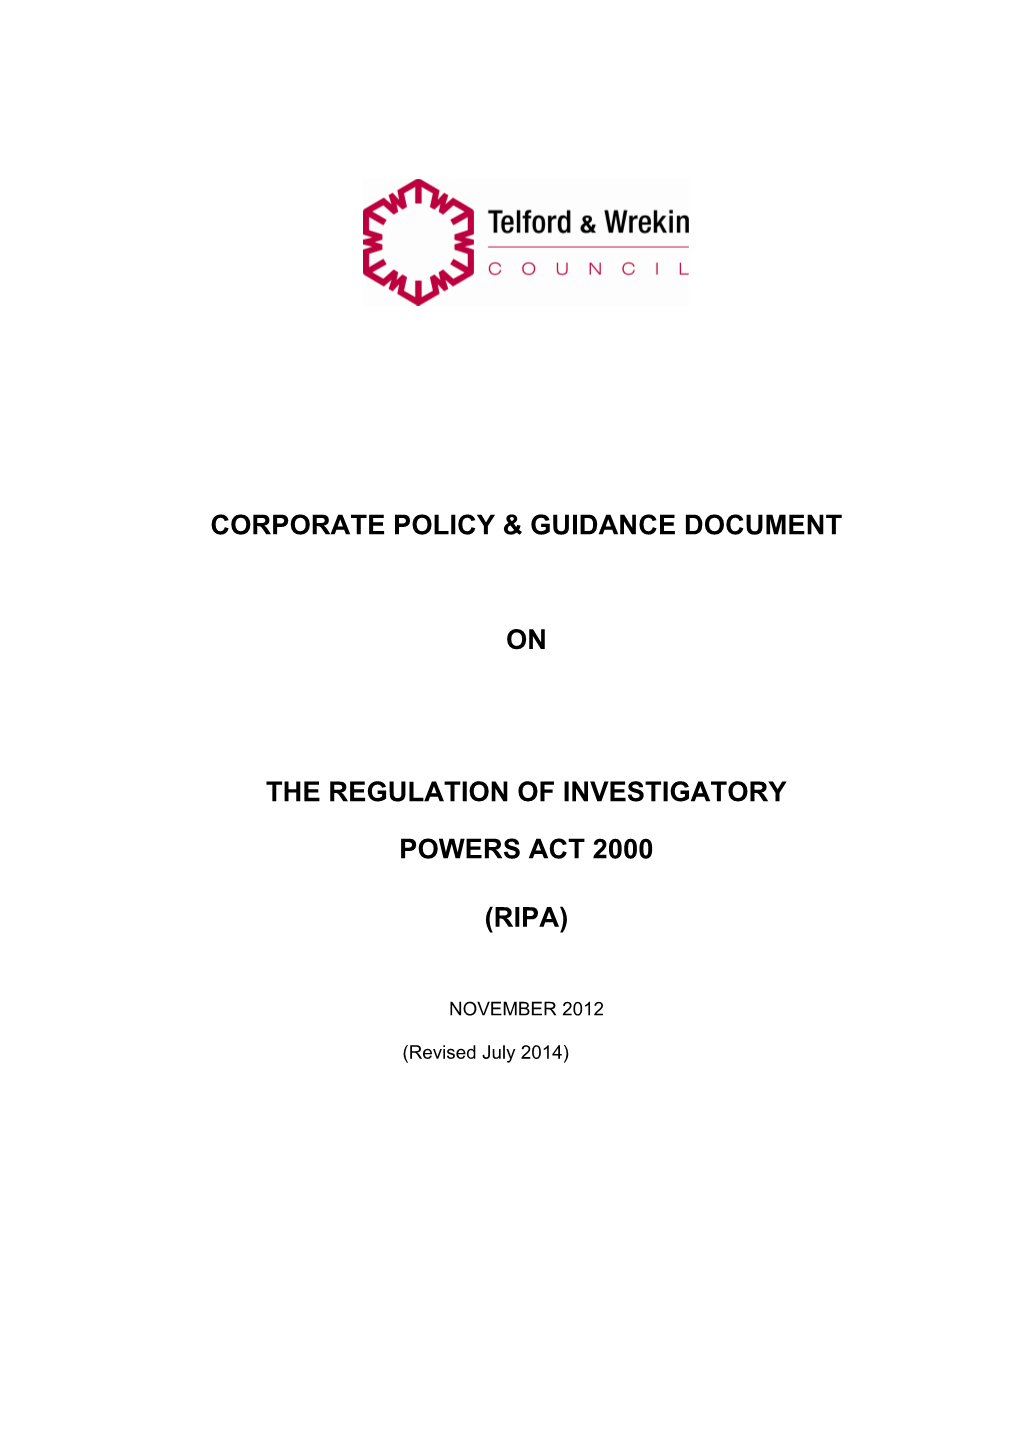 Corporate Policy & Guidance Document